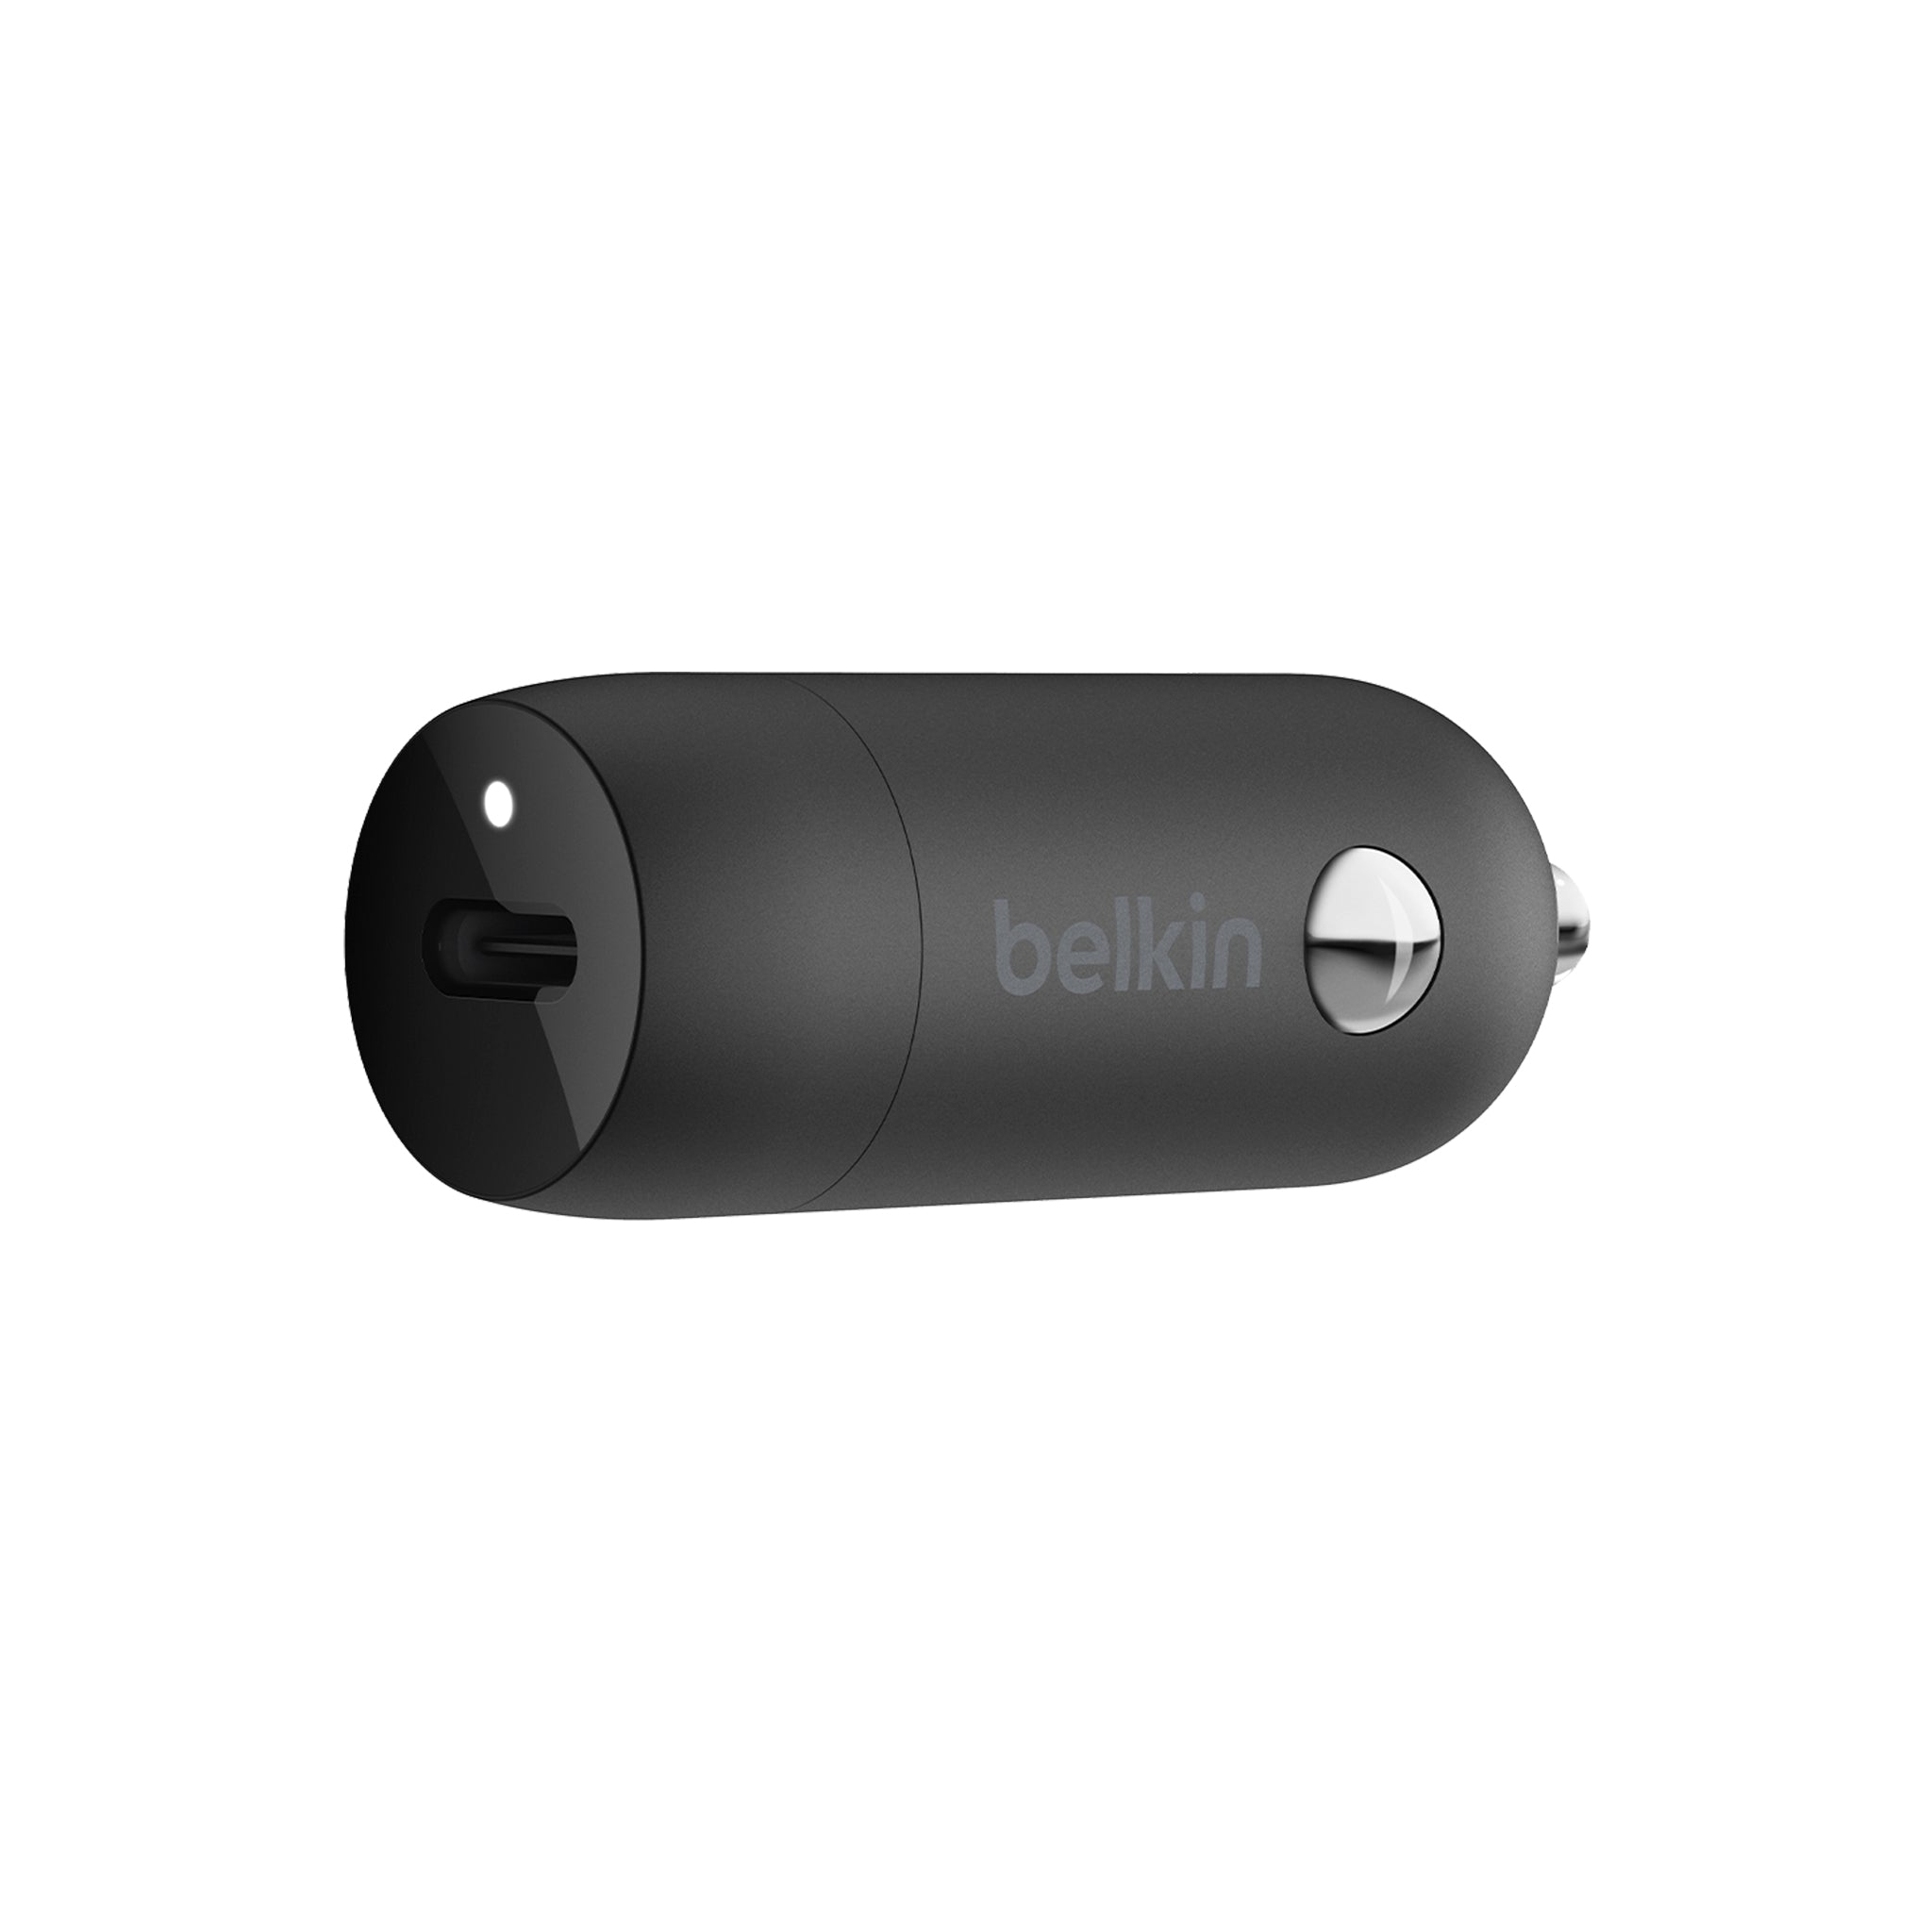 Belkin - Usb C Power Delivery Car Charger 18w - Black